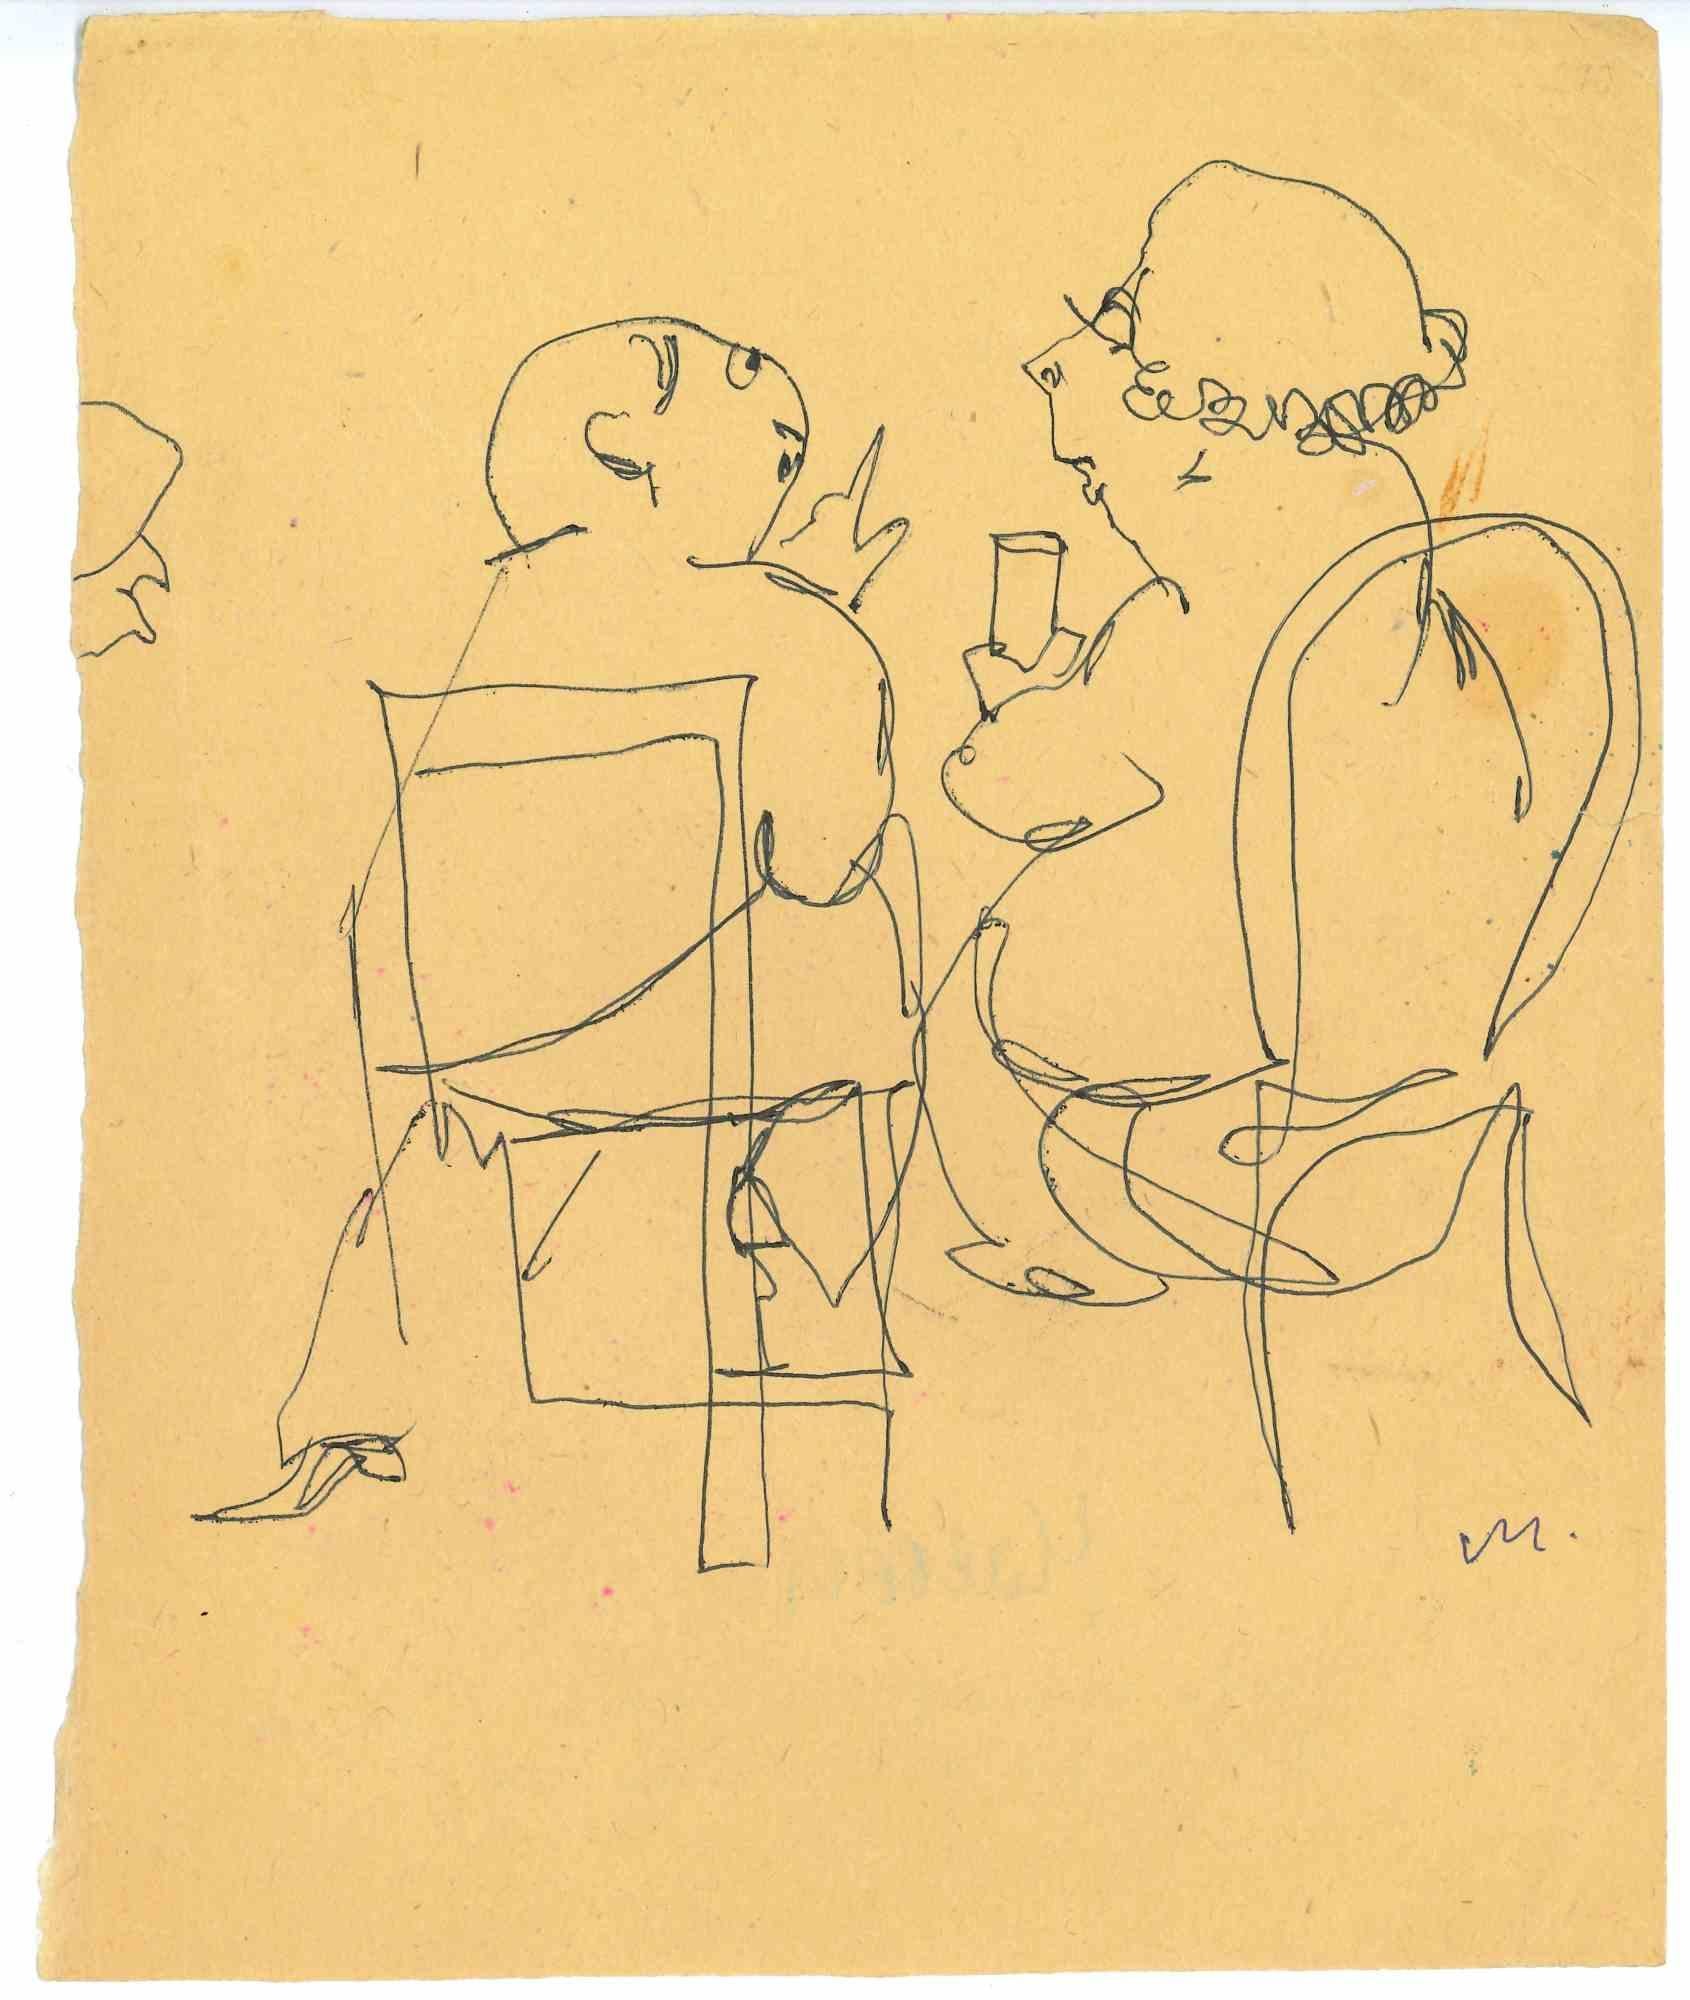 Why be difficult is a pen Drawing realized by Mino Maccari  (1924-1989) in 1955 ca.

Hand-signed on the back and title in Italian, Autograph of the artist.

Good conditions with a small cut on the right.

Mino Maccari (Siena, 1924-Rome, June 16,